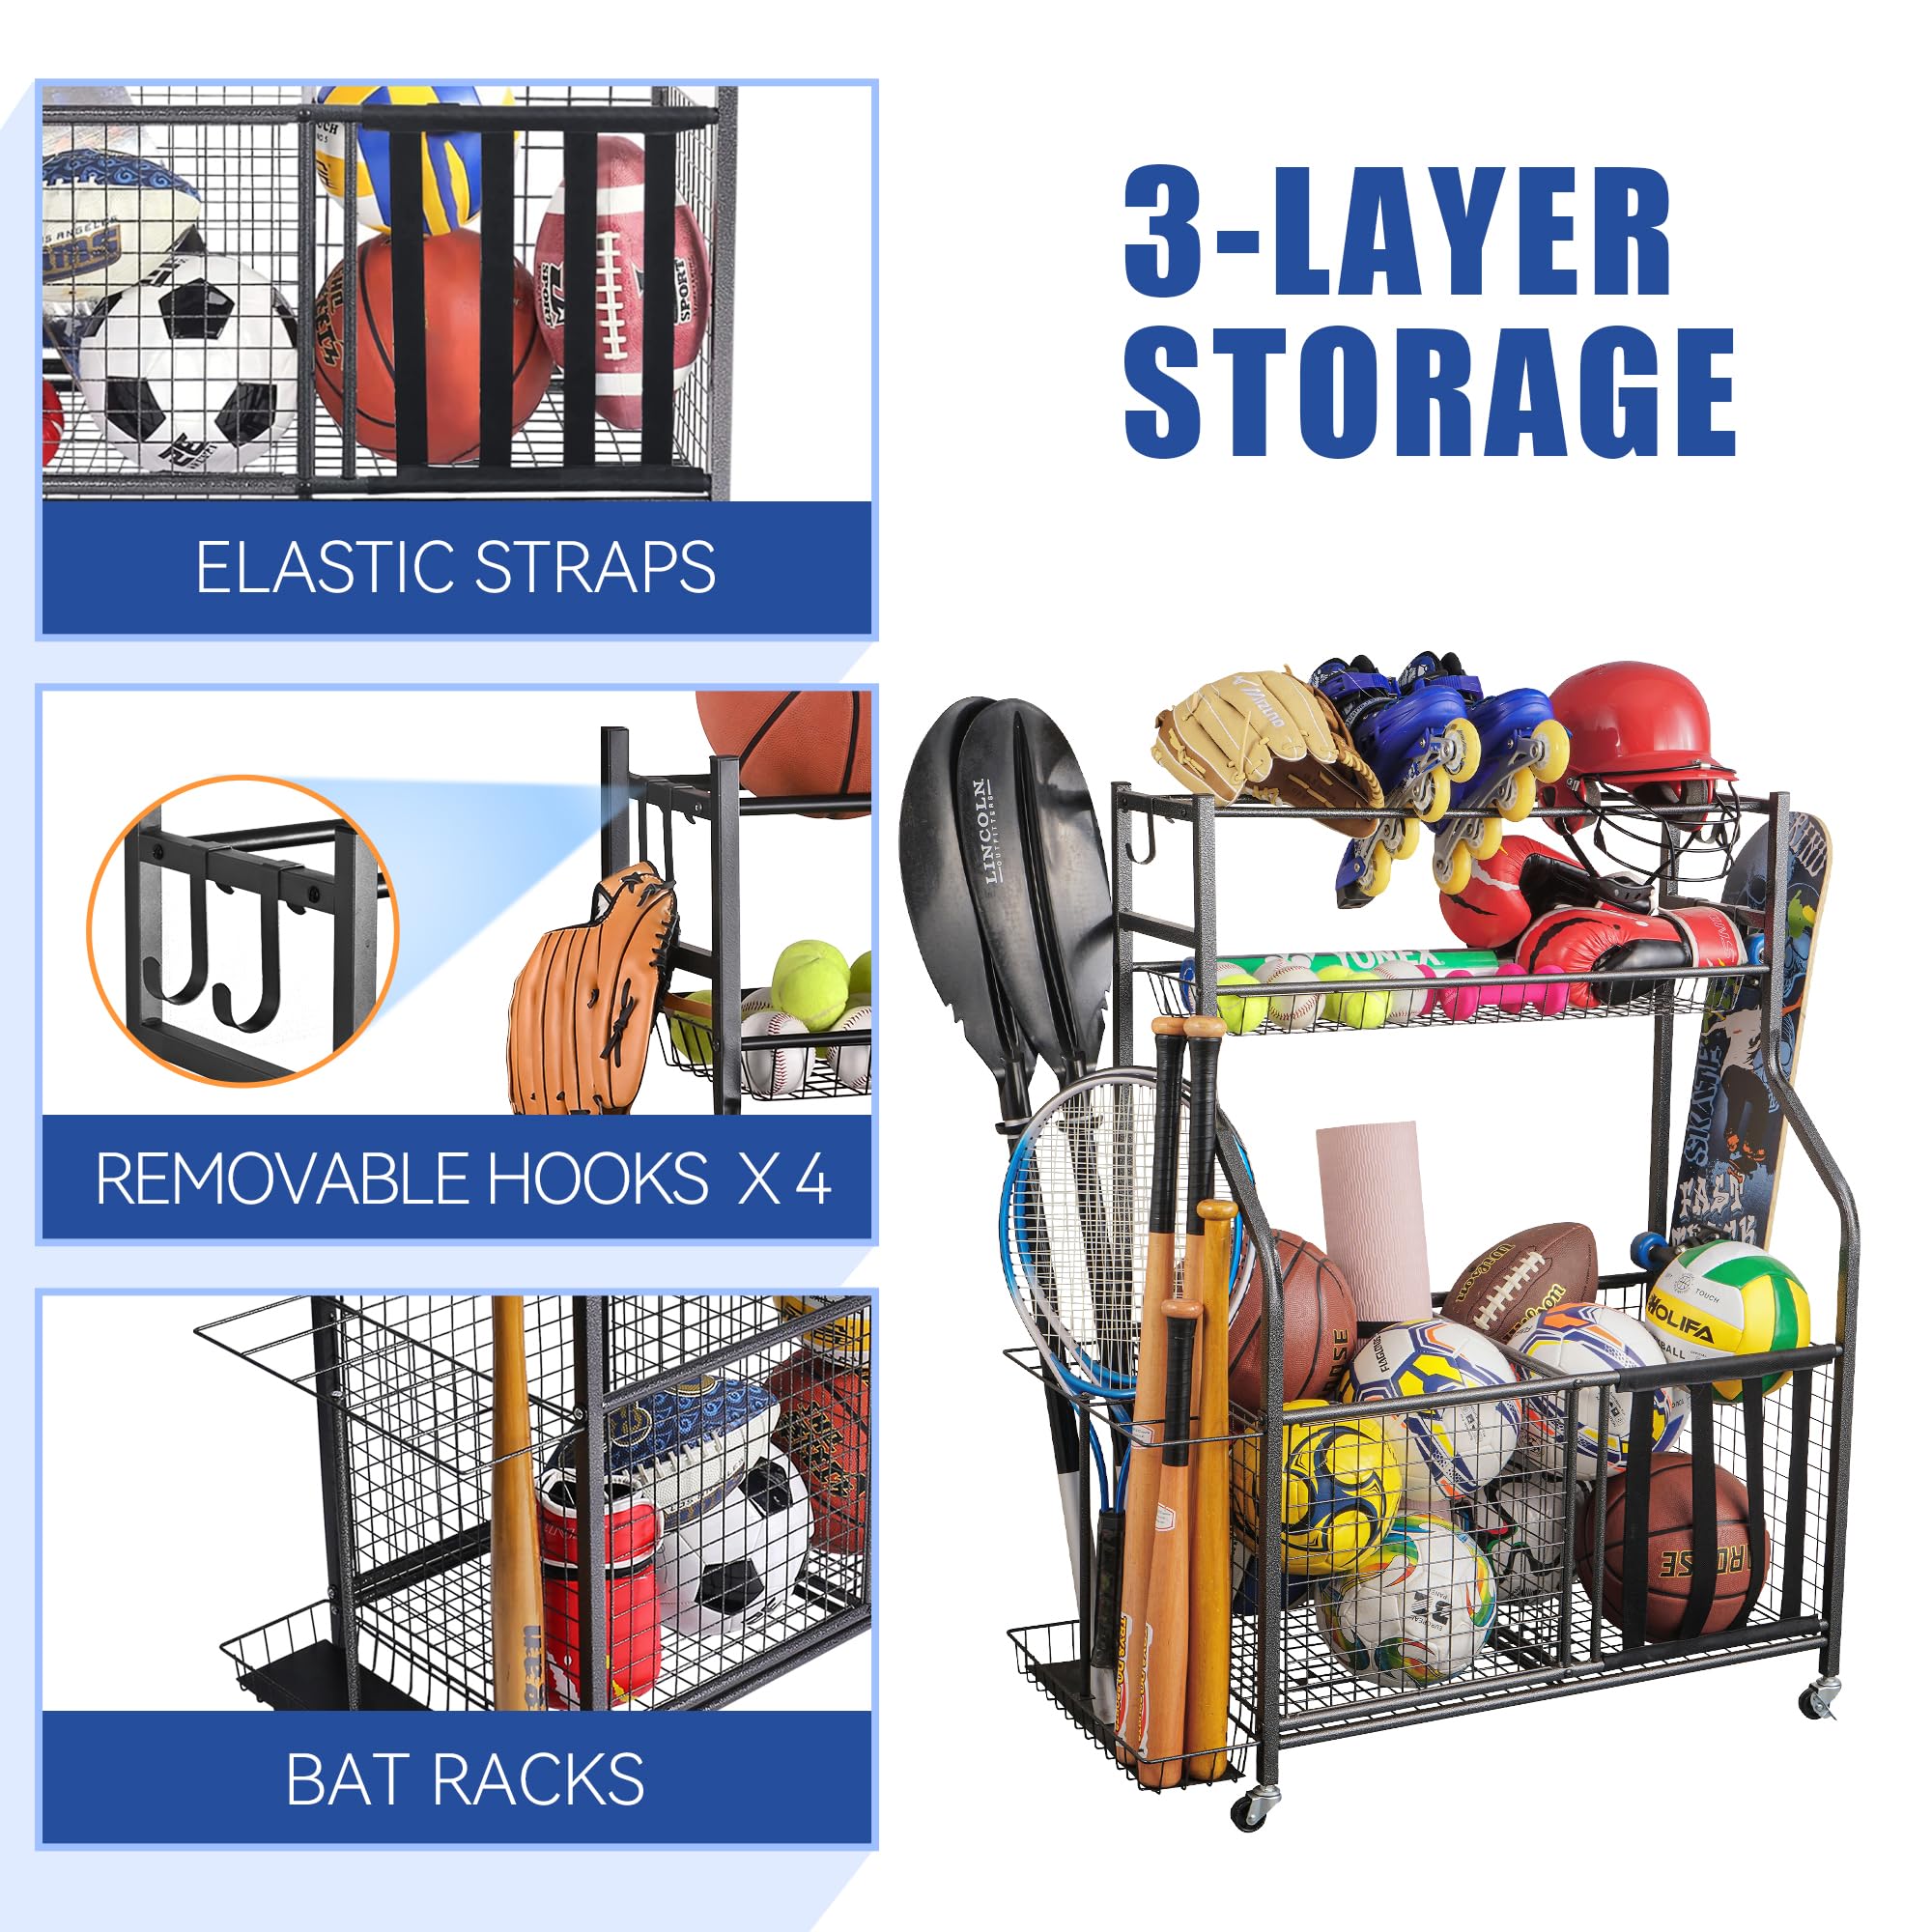 Mythinglogic Sports Equipment Organizer, Large Capacity Storage With Hooks and Baskets, Ball and Toy Organizer for Garage